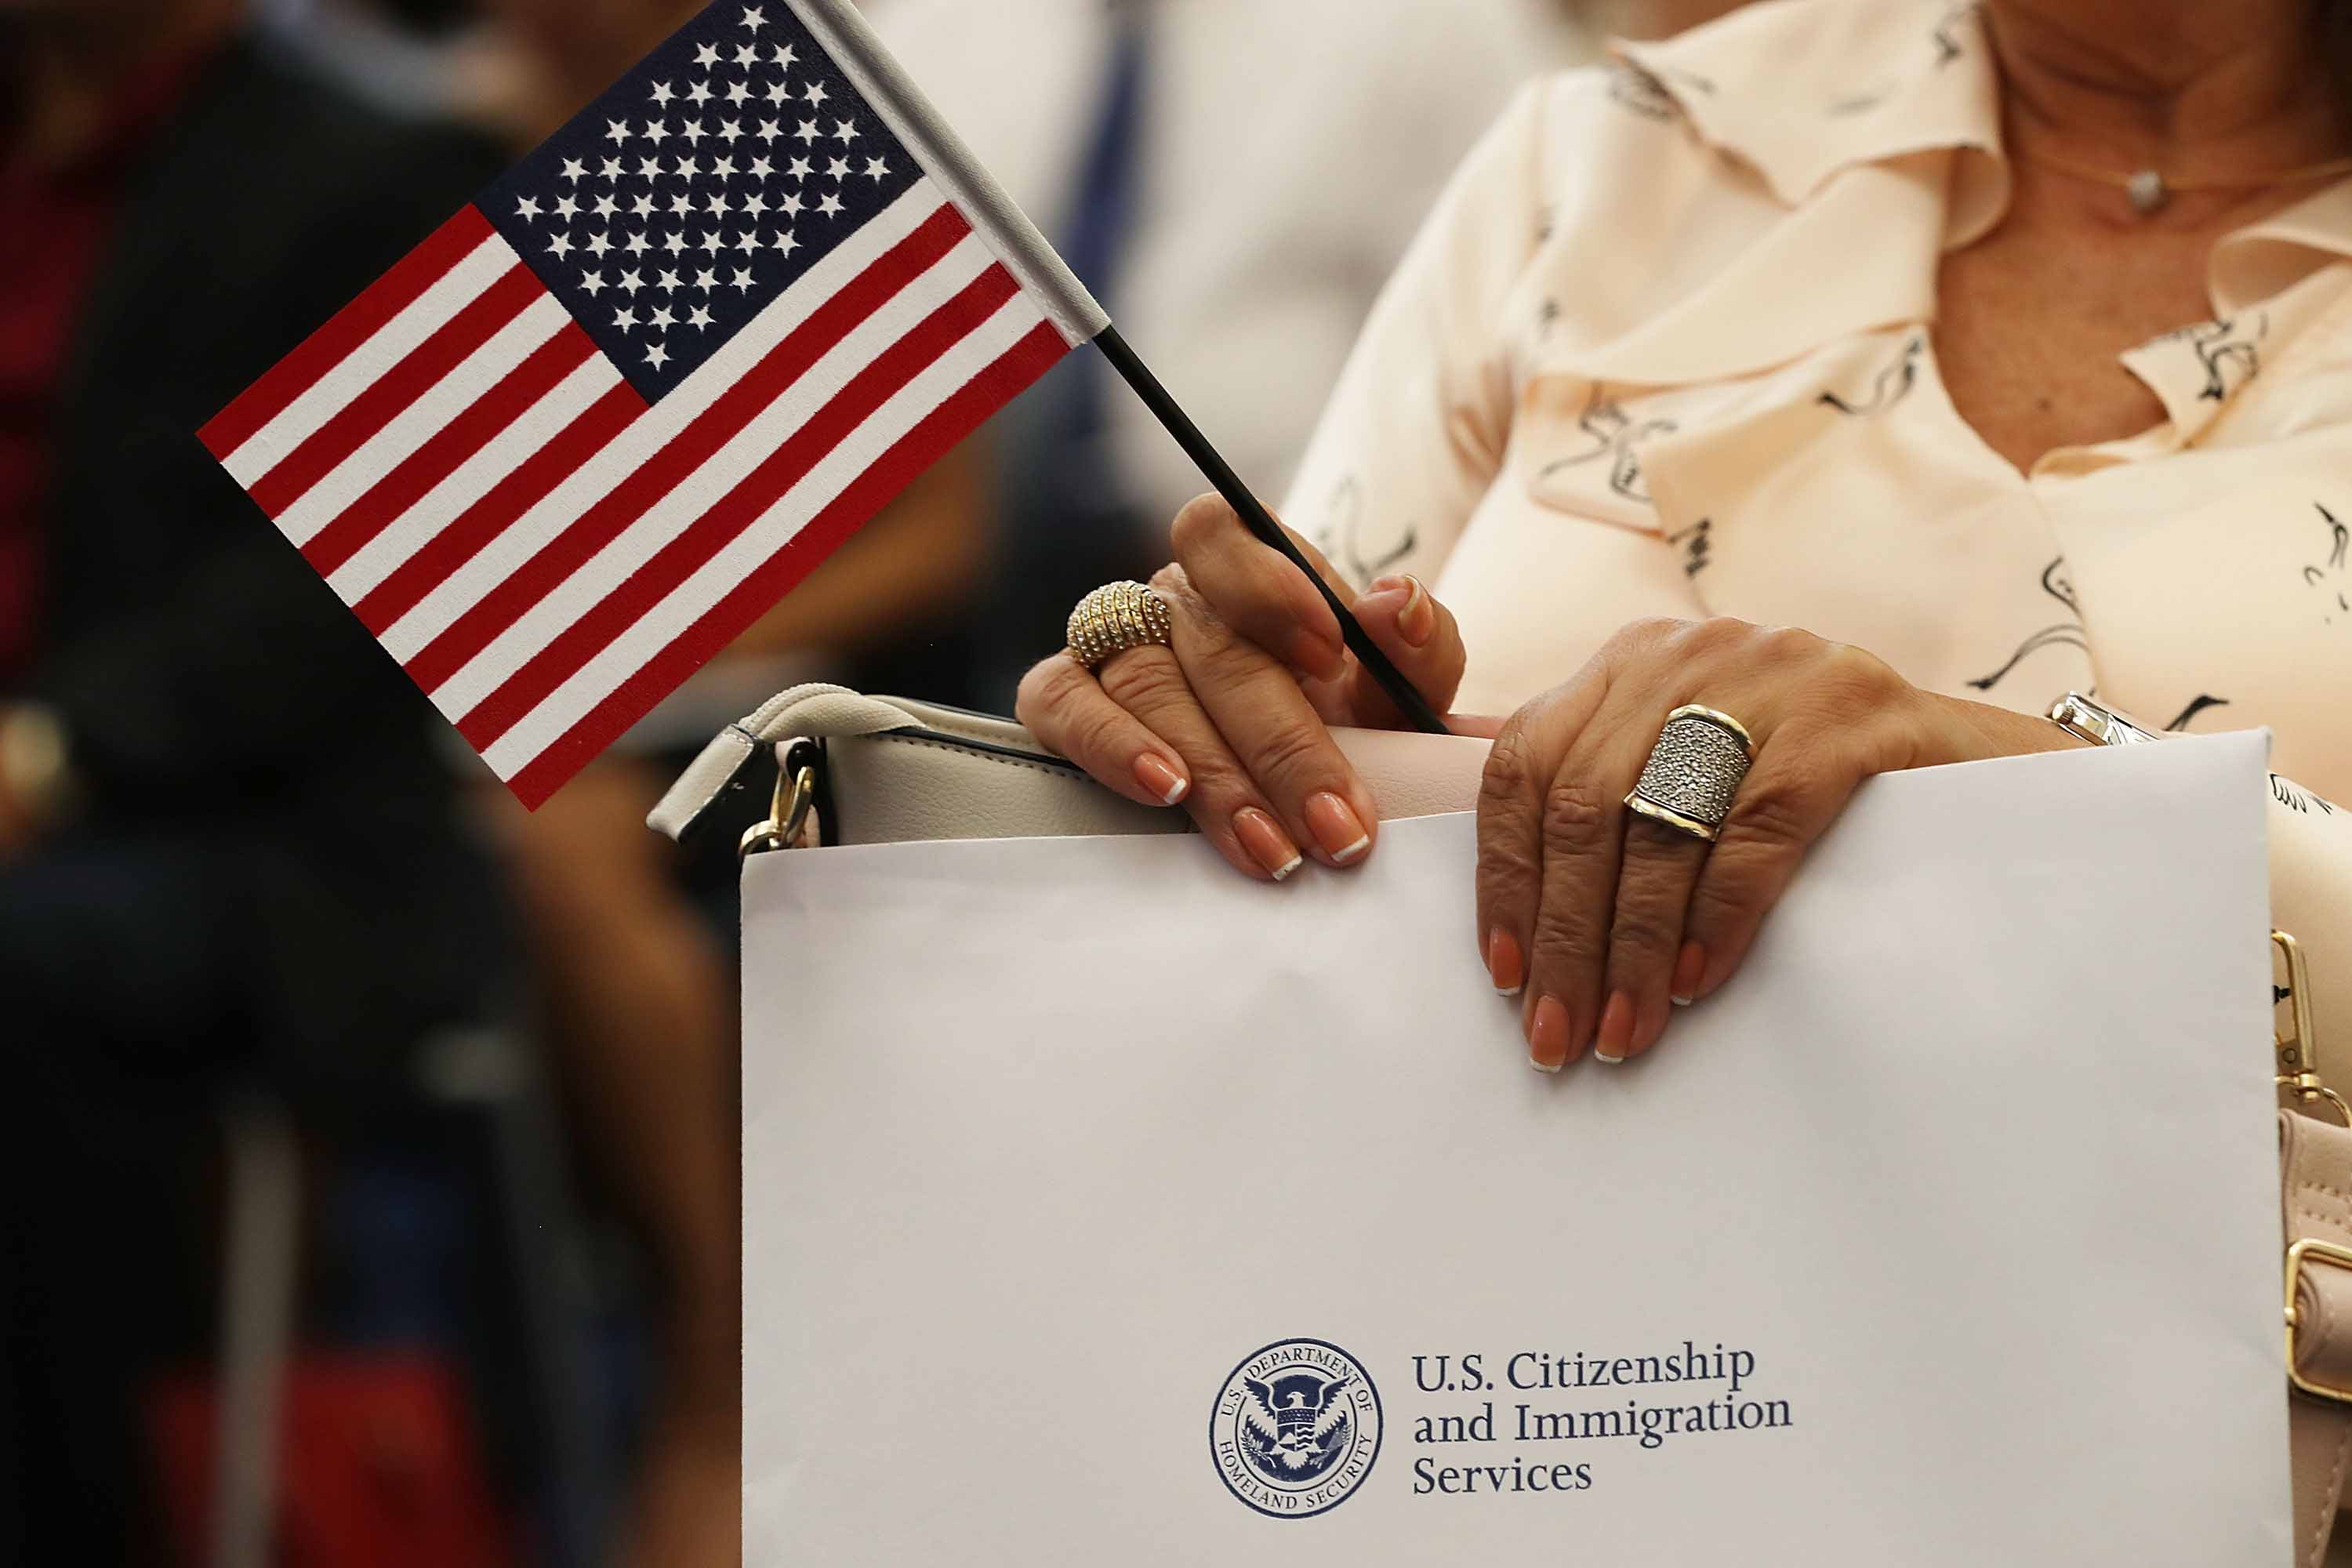 How canceled citizenship ceremonies could impact the 2020 election | CNN